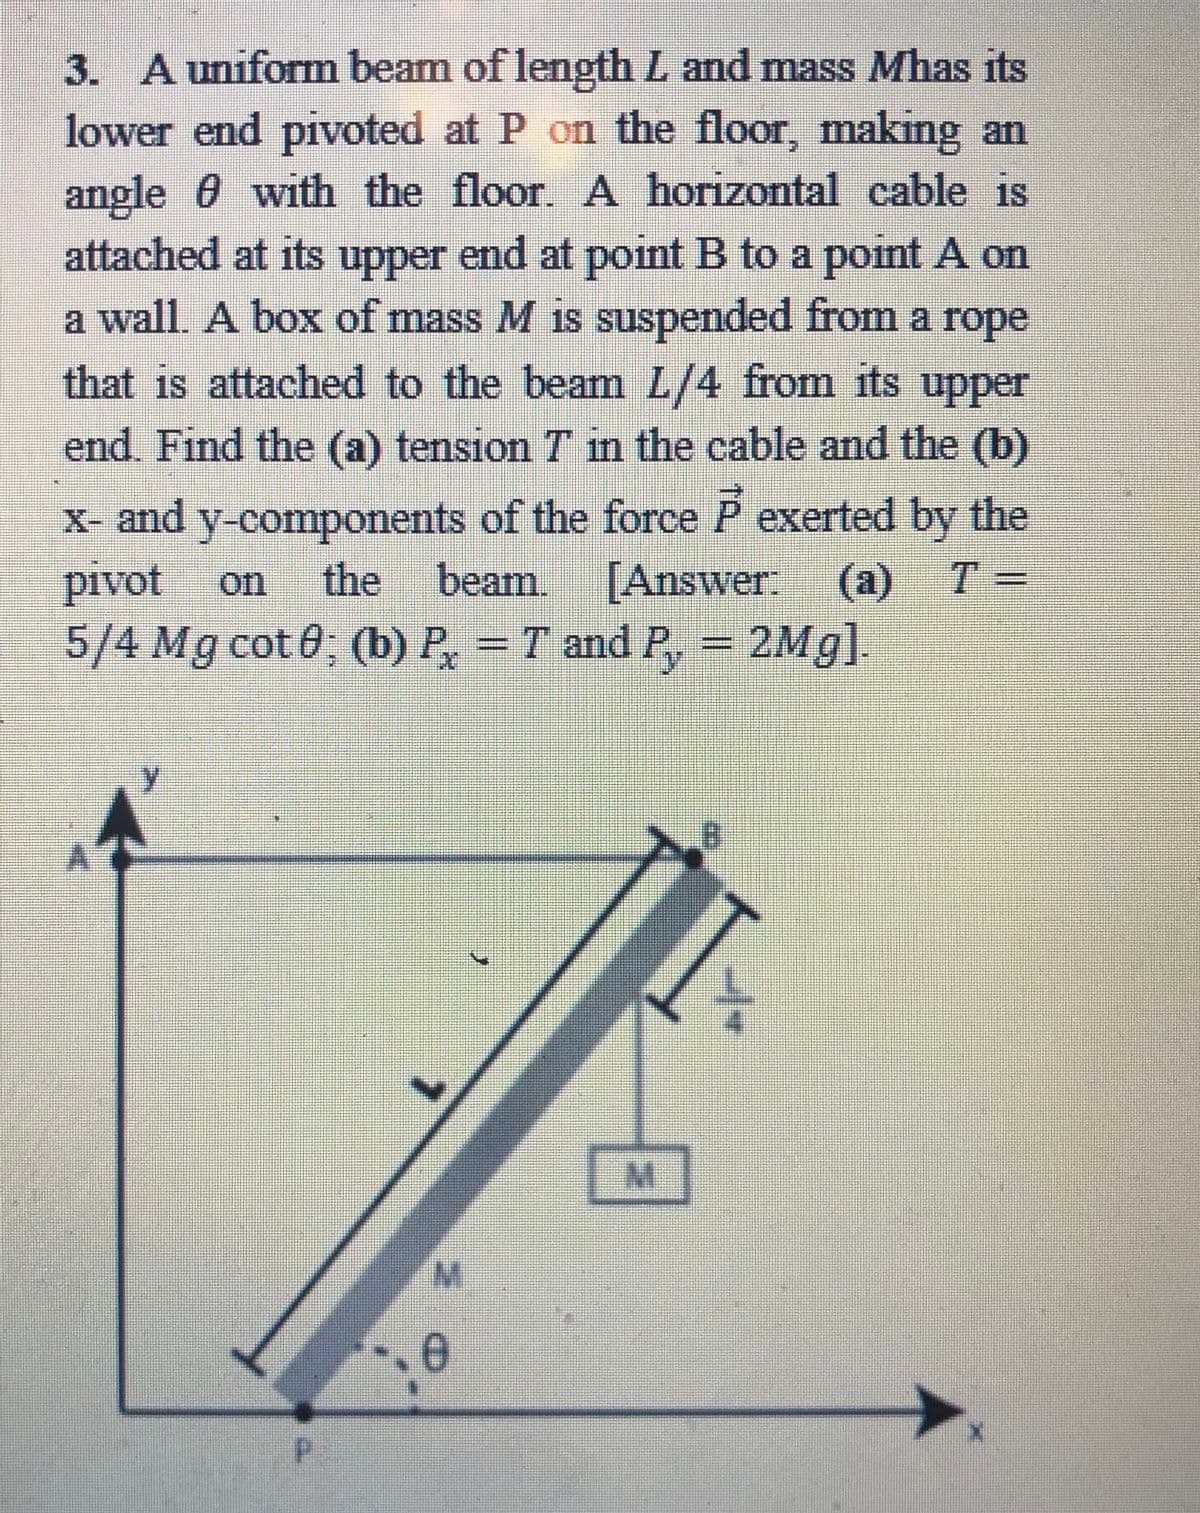 3. A uniform beam of length L and mass Mhas its
lower end pivoted at P on the floor, making an
angle 6 with the floor. A horizontal cable is
attached at its end at point B to a point A on
a wall. A box of mass M is suspended from a rope
that is attached to the beam L/4 from its upper
upper
end. Find the (a) tension T in the cable and the (b)
X- and y-components of the force P exerted by the
T =
pivot on
the
[Answer: (a)
5/4 Mg cot 0; (b) P, = T and P, = 2Mg].
beam.
M
